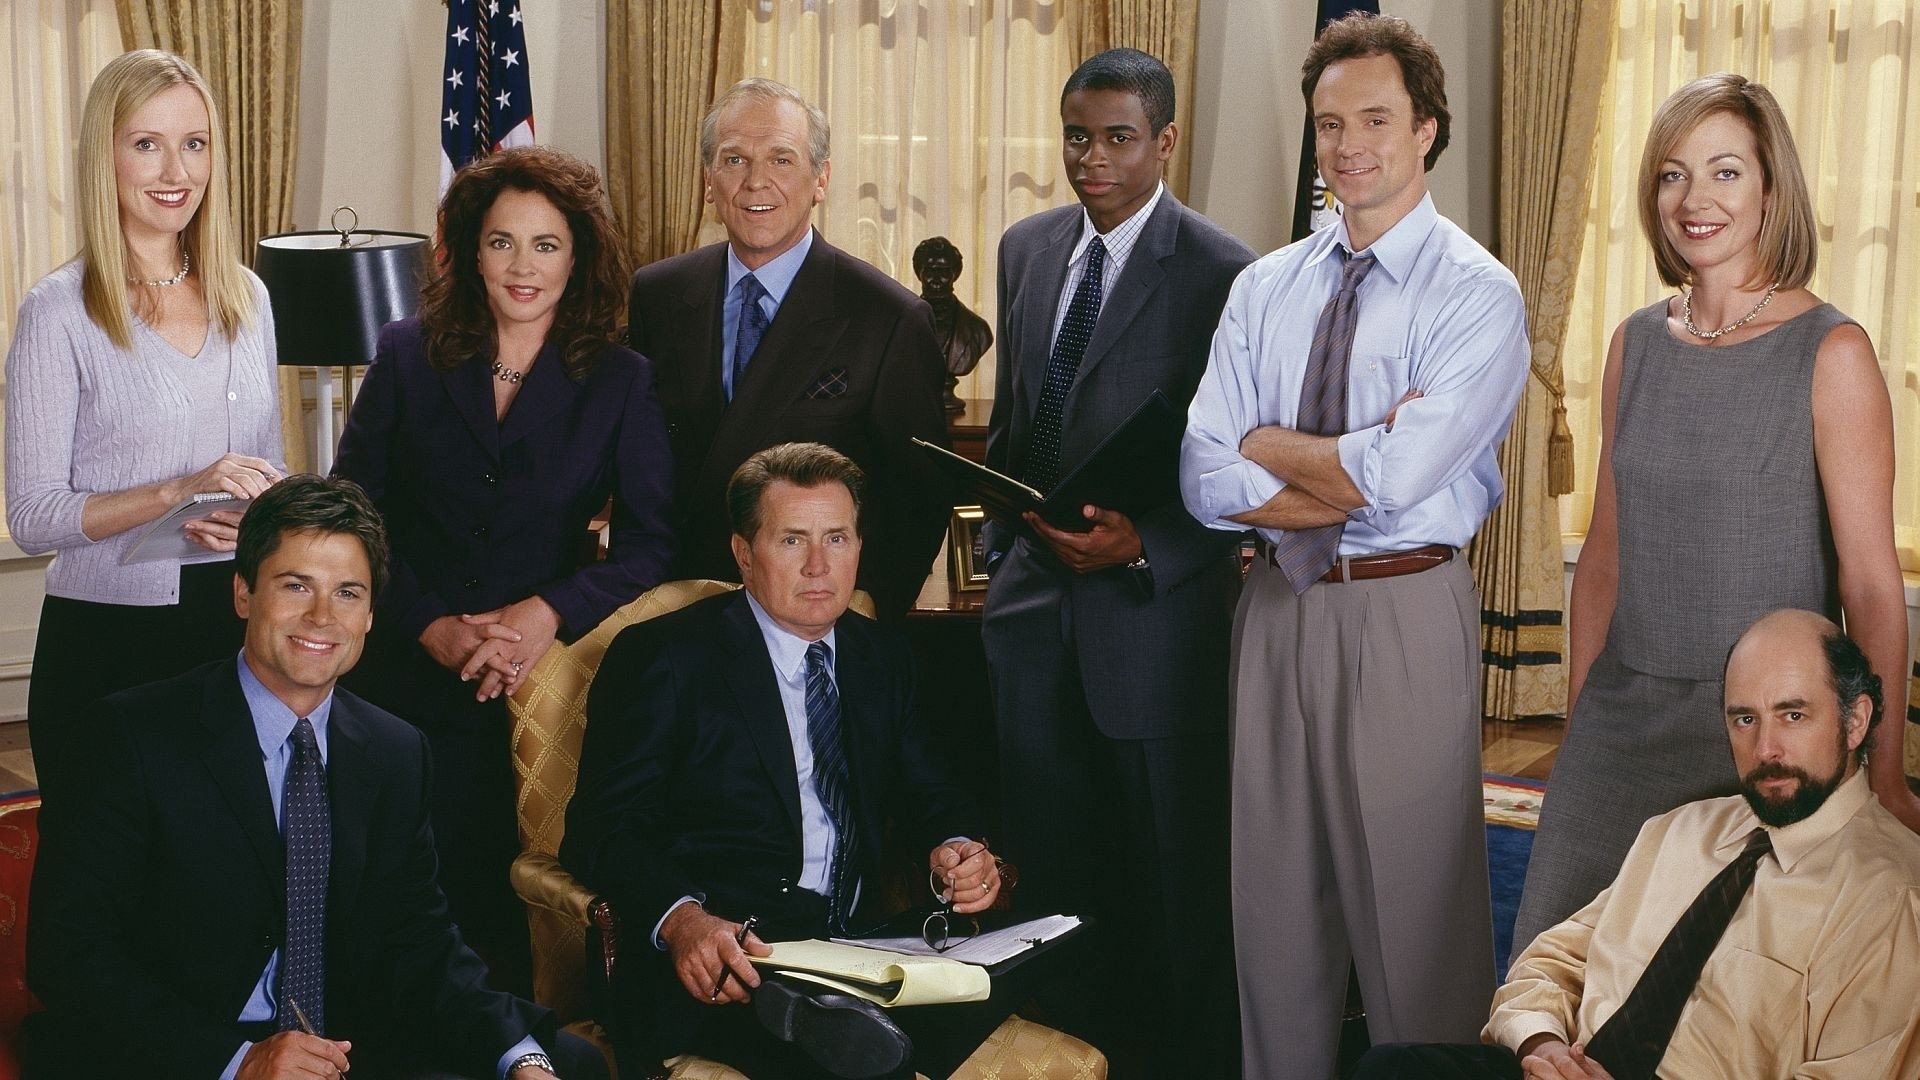 The West Wing (TV Series): The fictitious Democratic administration of President Josiah Bartlet, NBC original. 1920x1080 Full HD Wallpaper.